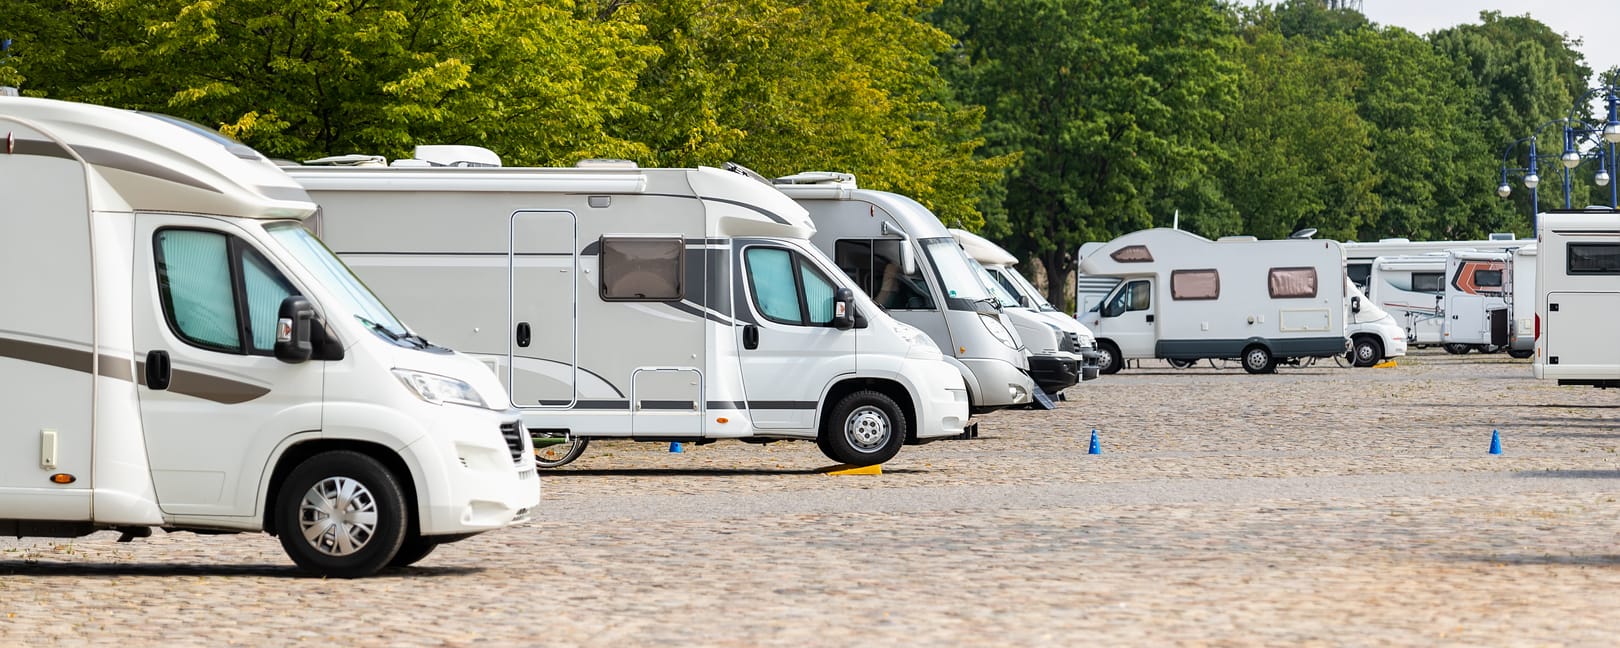 Is it Better to Rent an RV or Purchase an RV?